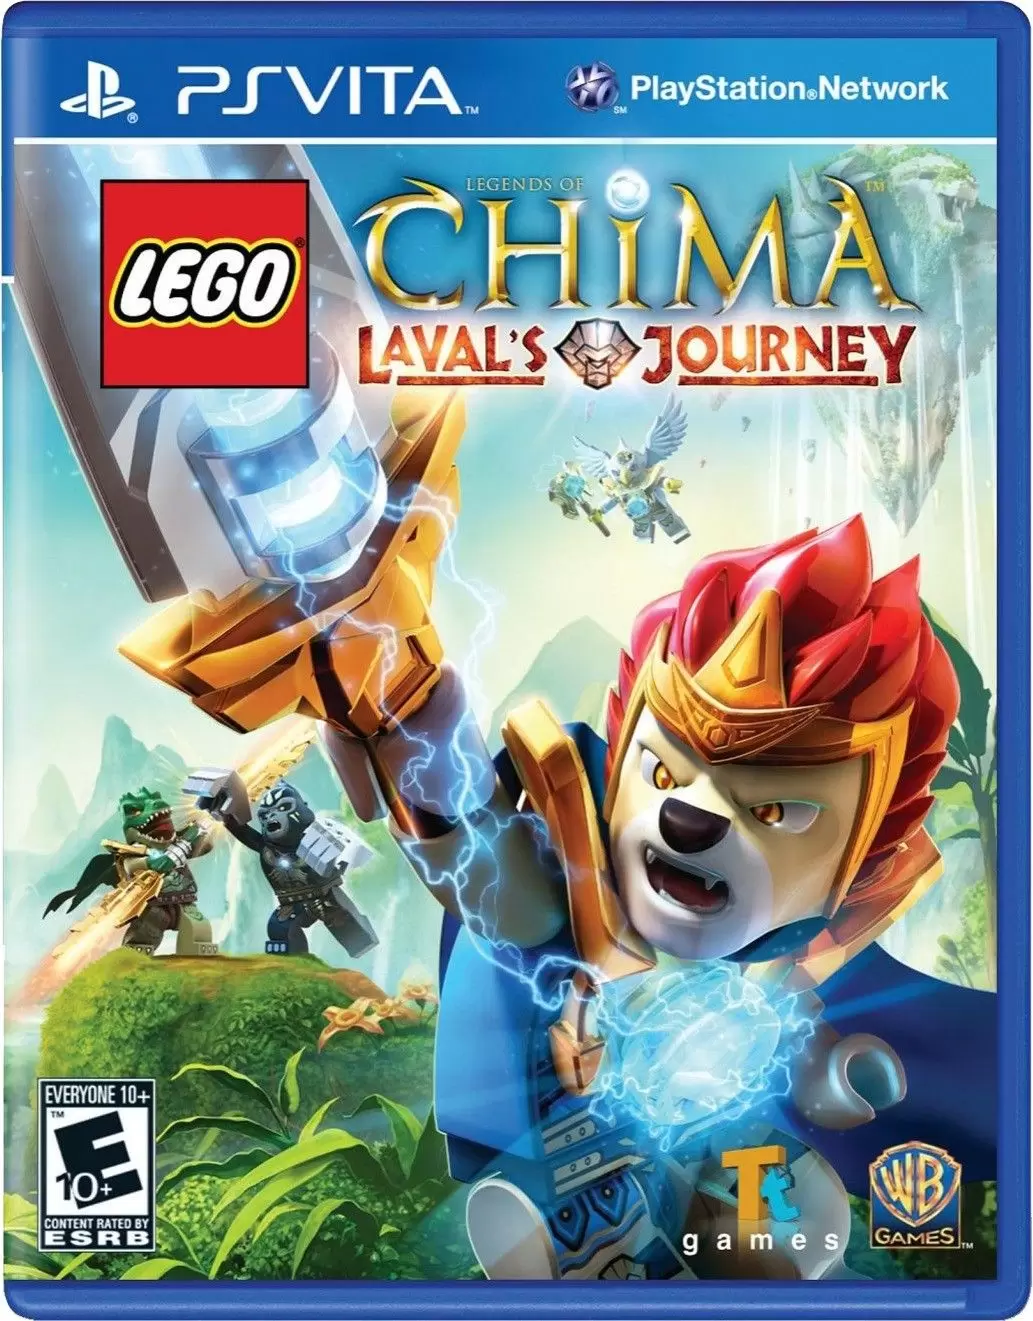 PS Vita Games - LEGO Legends of Chima: Laval\'s Journey